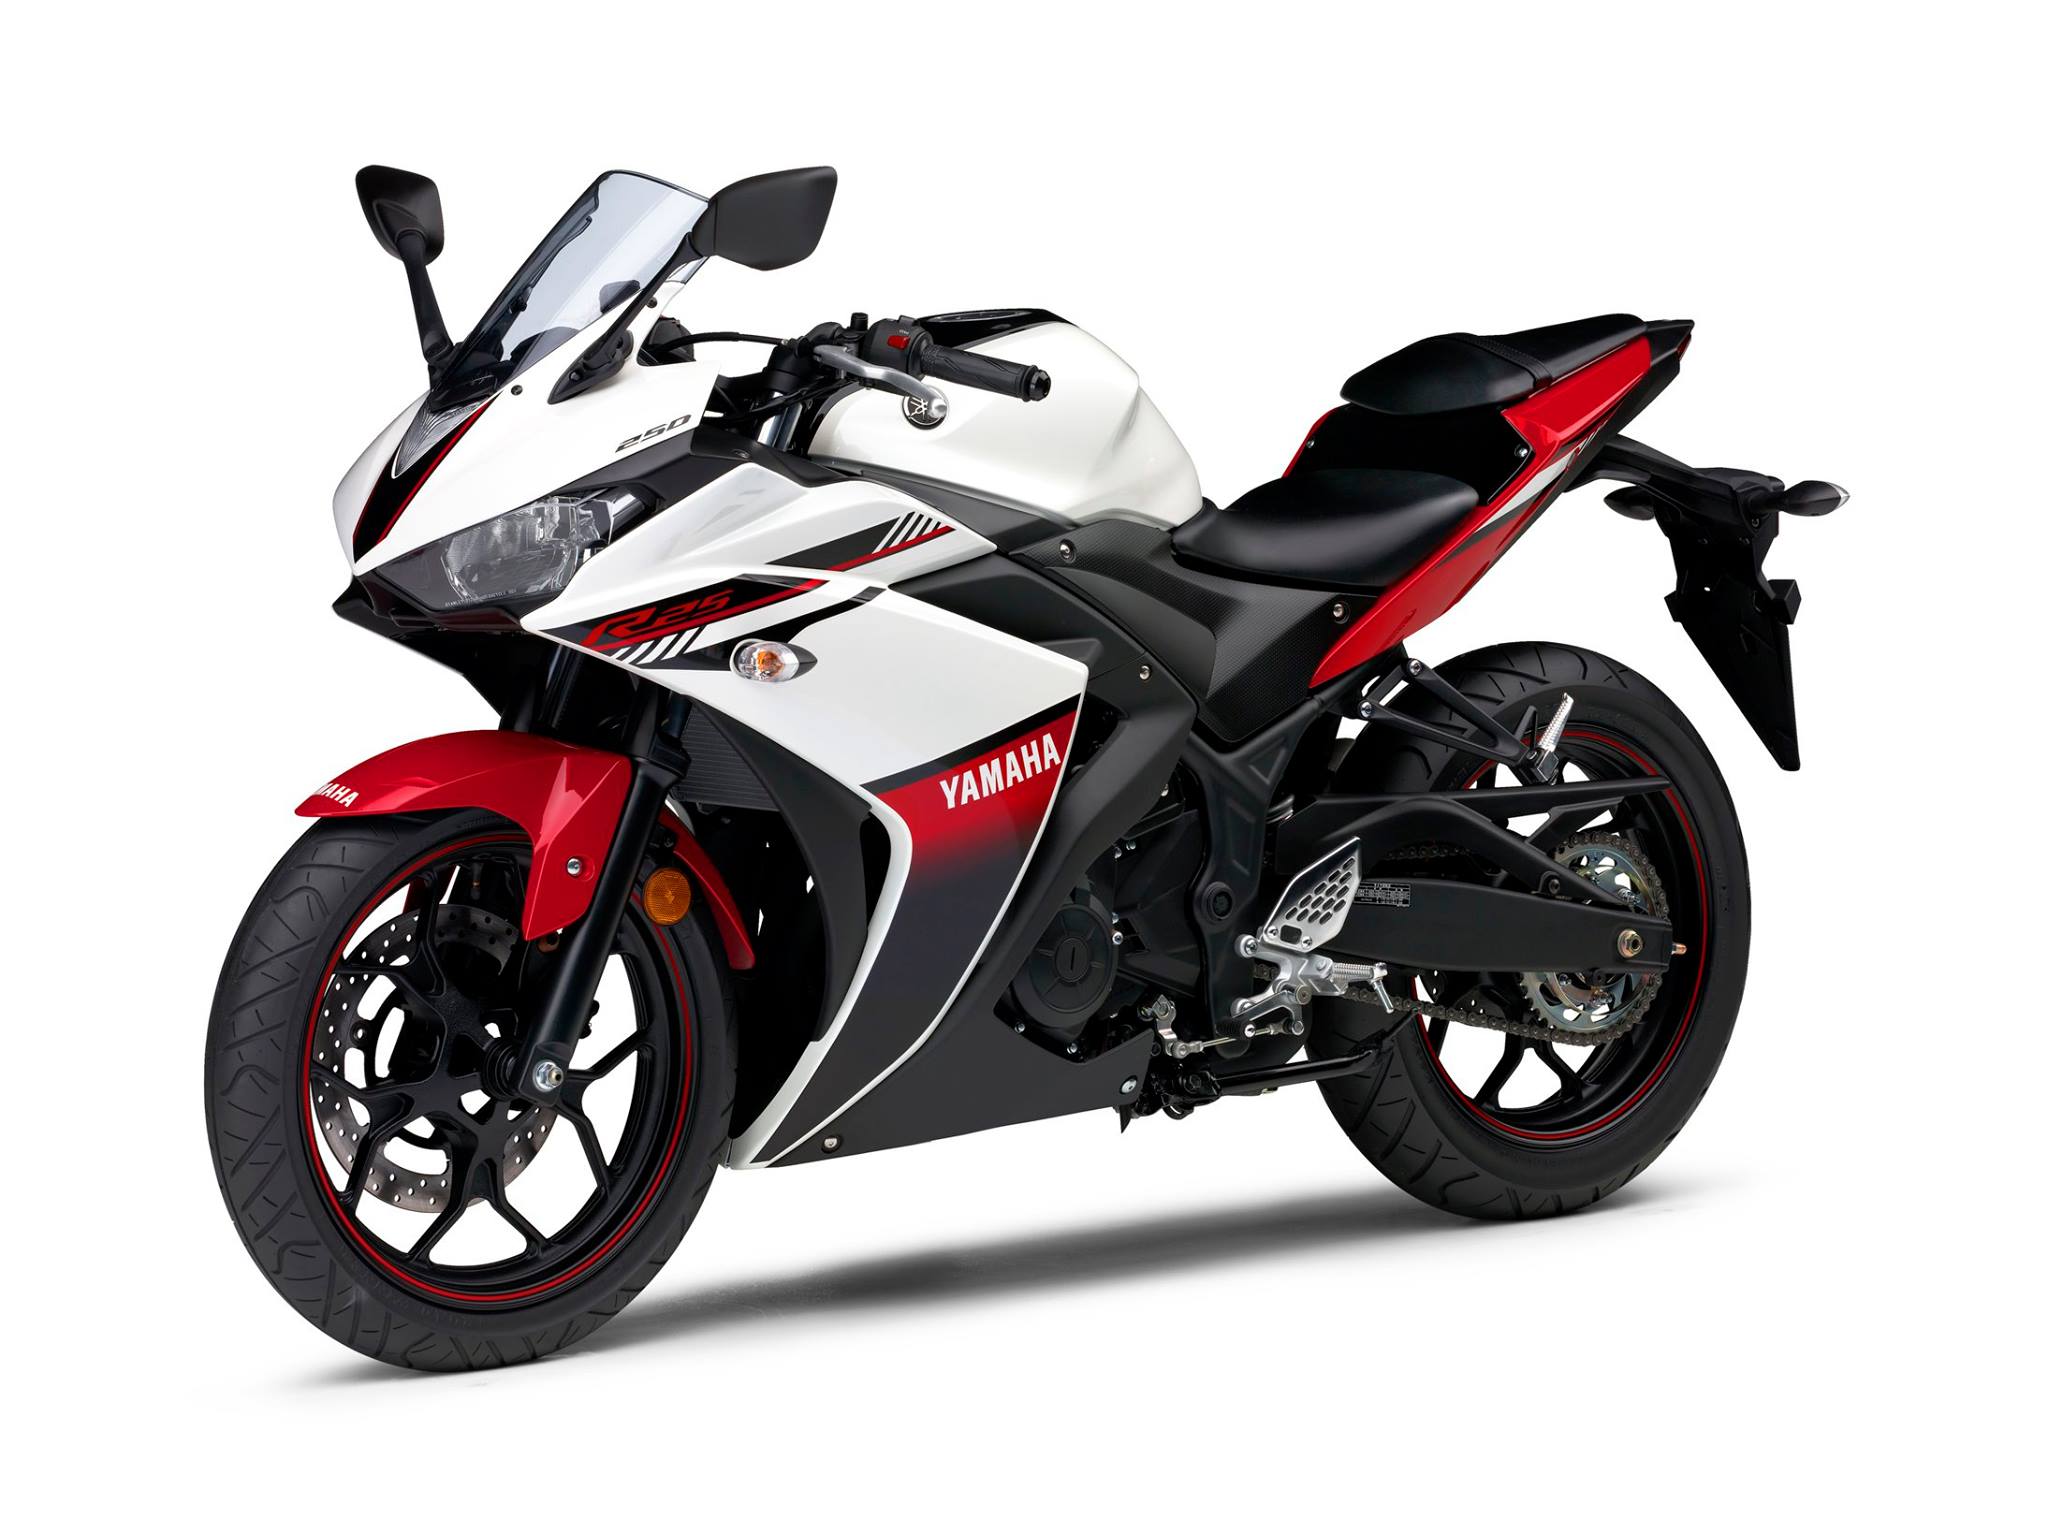 Yamaha YZF-R25 250cc Bike 2020 Price in Pakistan Specs Review Features Pics